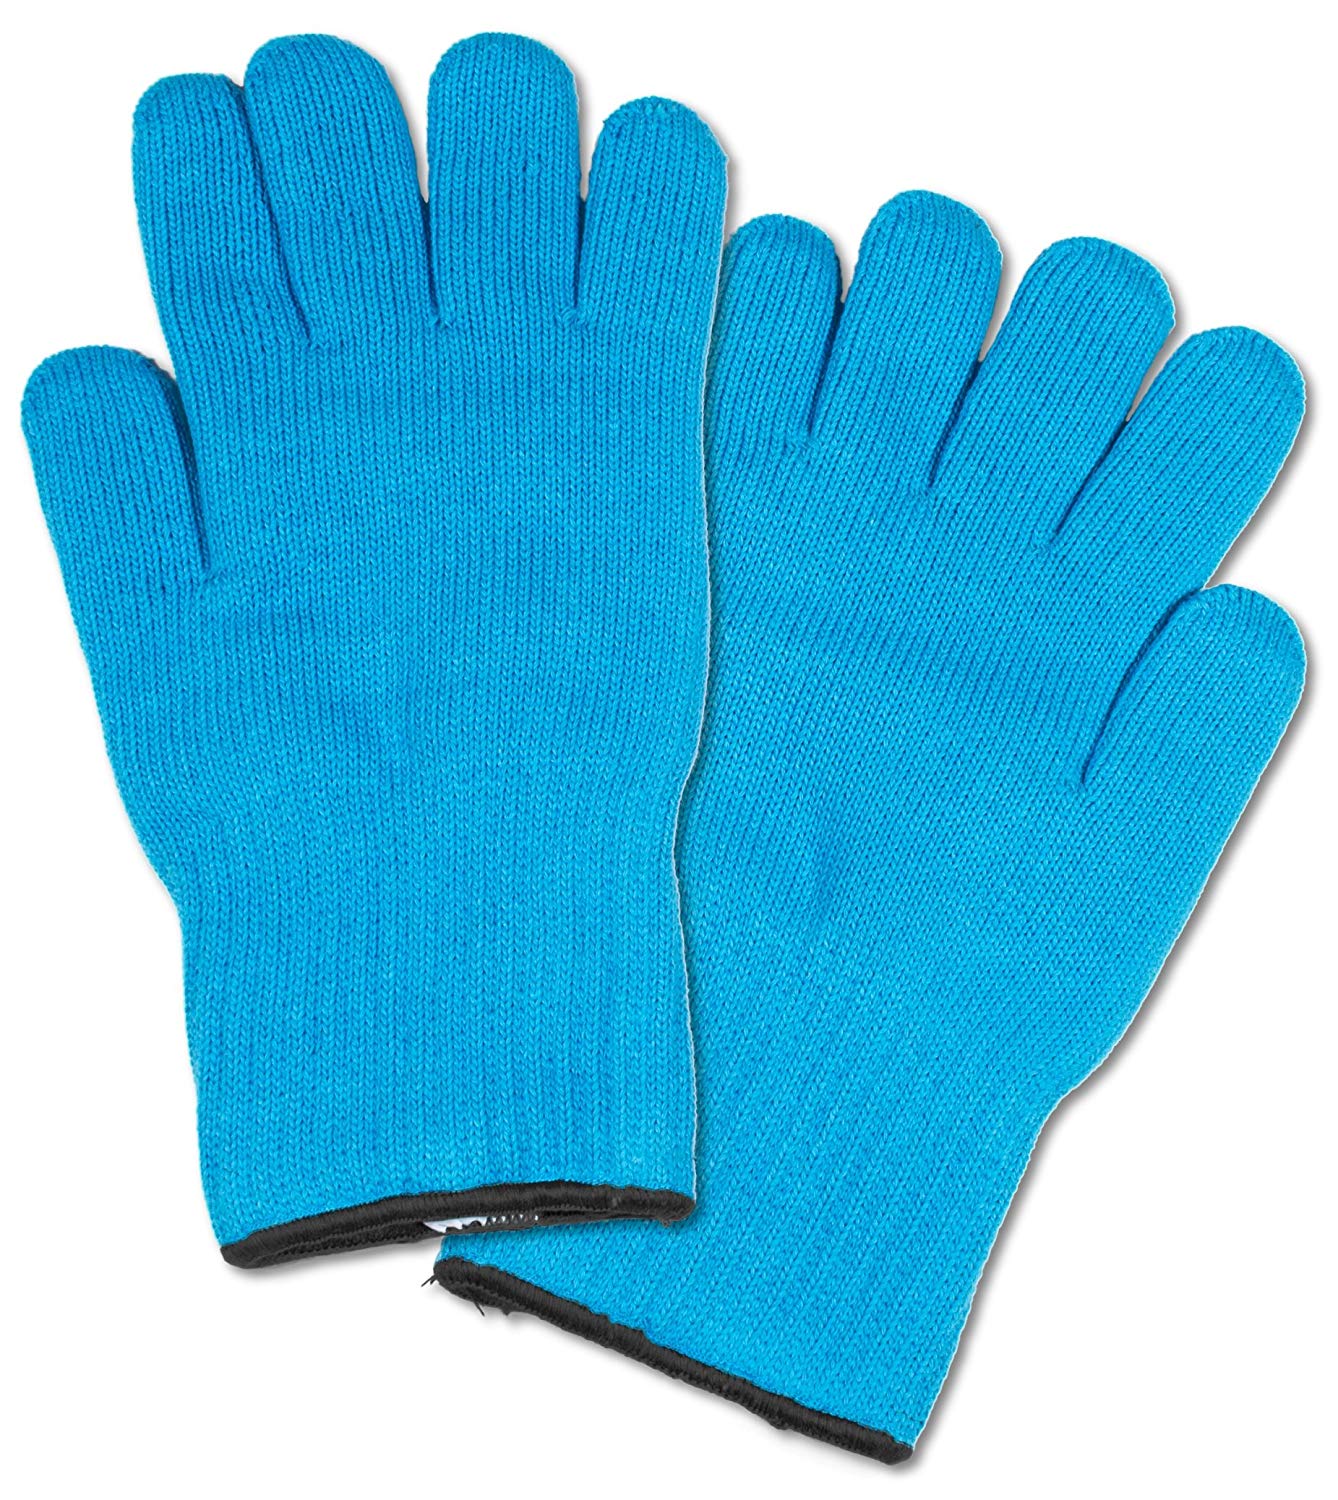 2 Pc Ultra Thick Oven Gloves - Heat Resistant Pot Holders or Safety Oven Mitts (Blue)